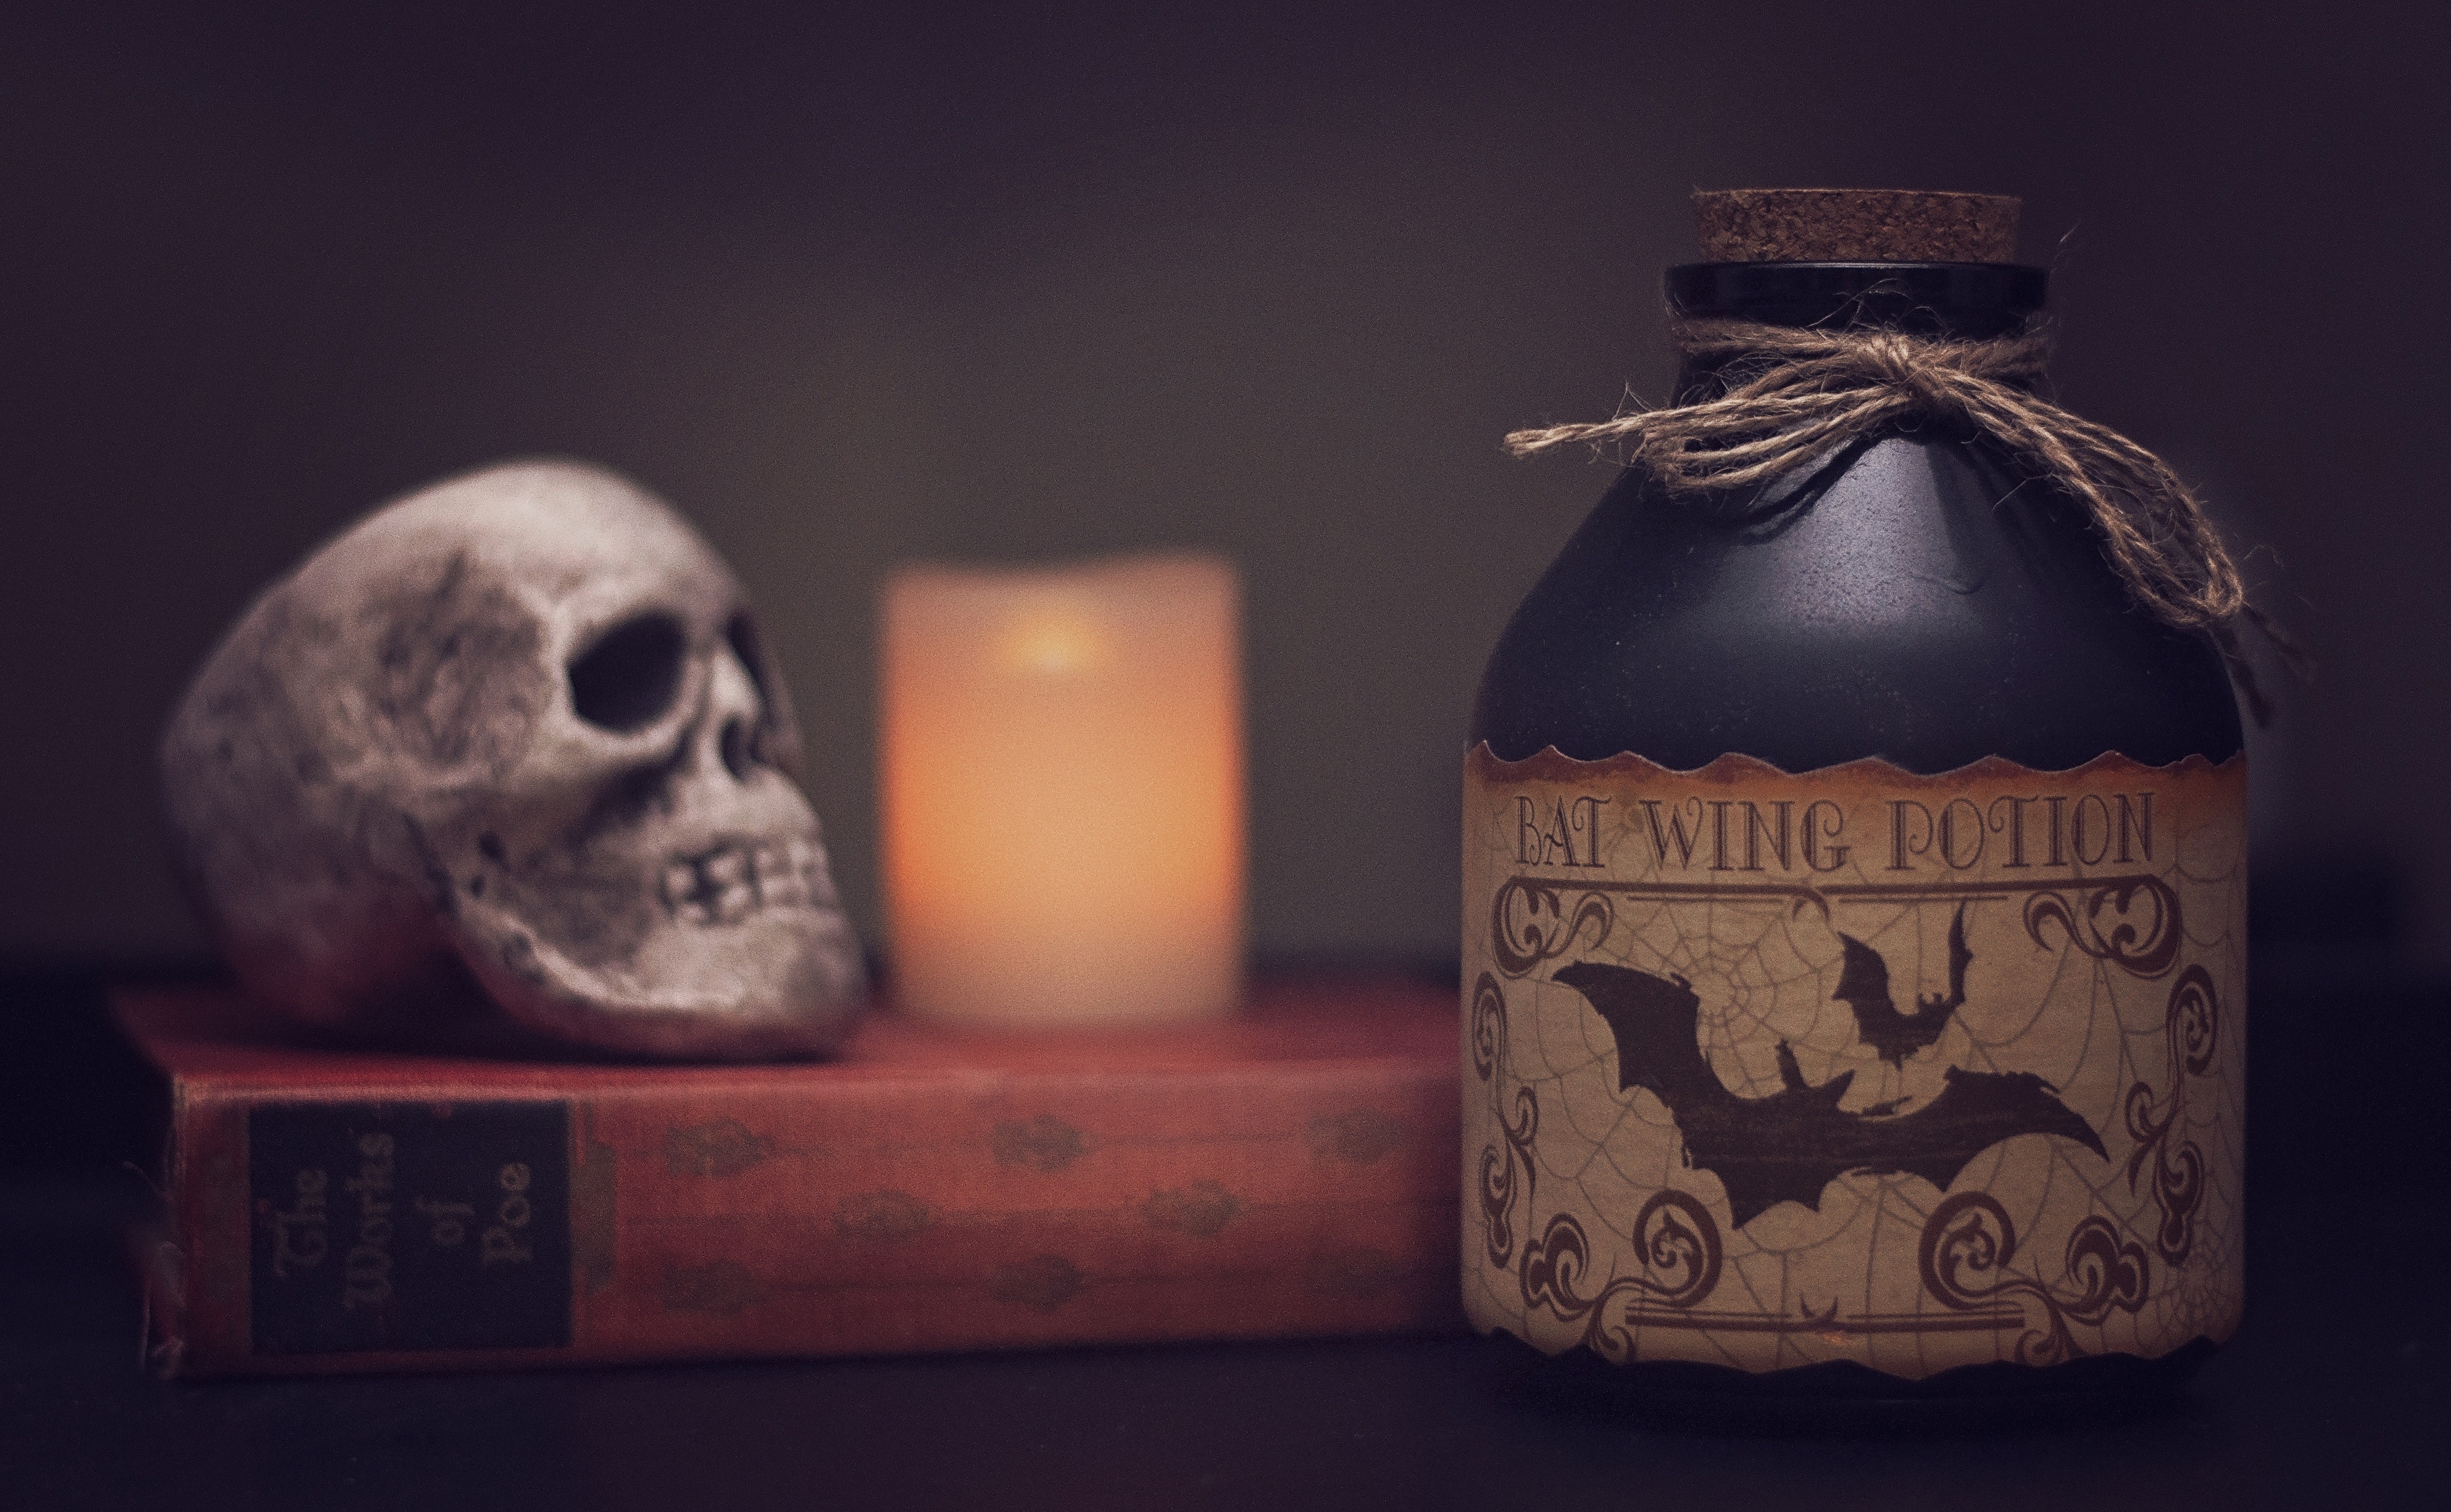 A mysterious and moody still life scene featuring a human skull resting on an old book, beside a candle, and a bottle labeled "batwing potion" with halloween-themed decorations.